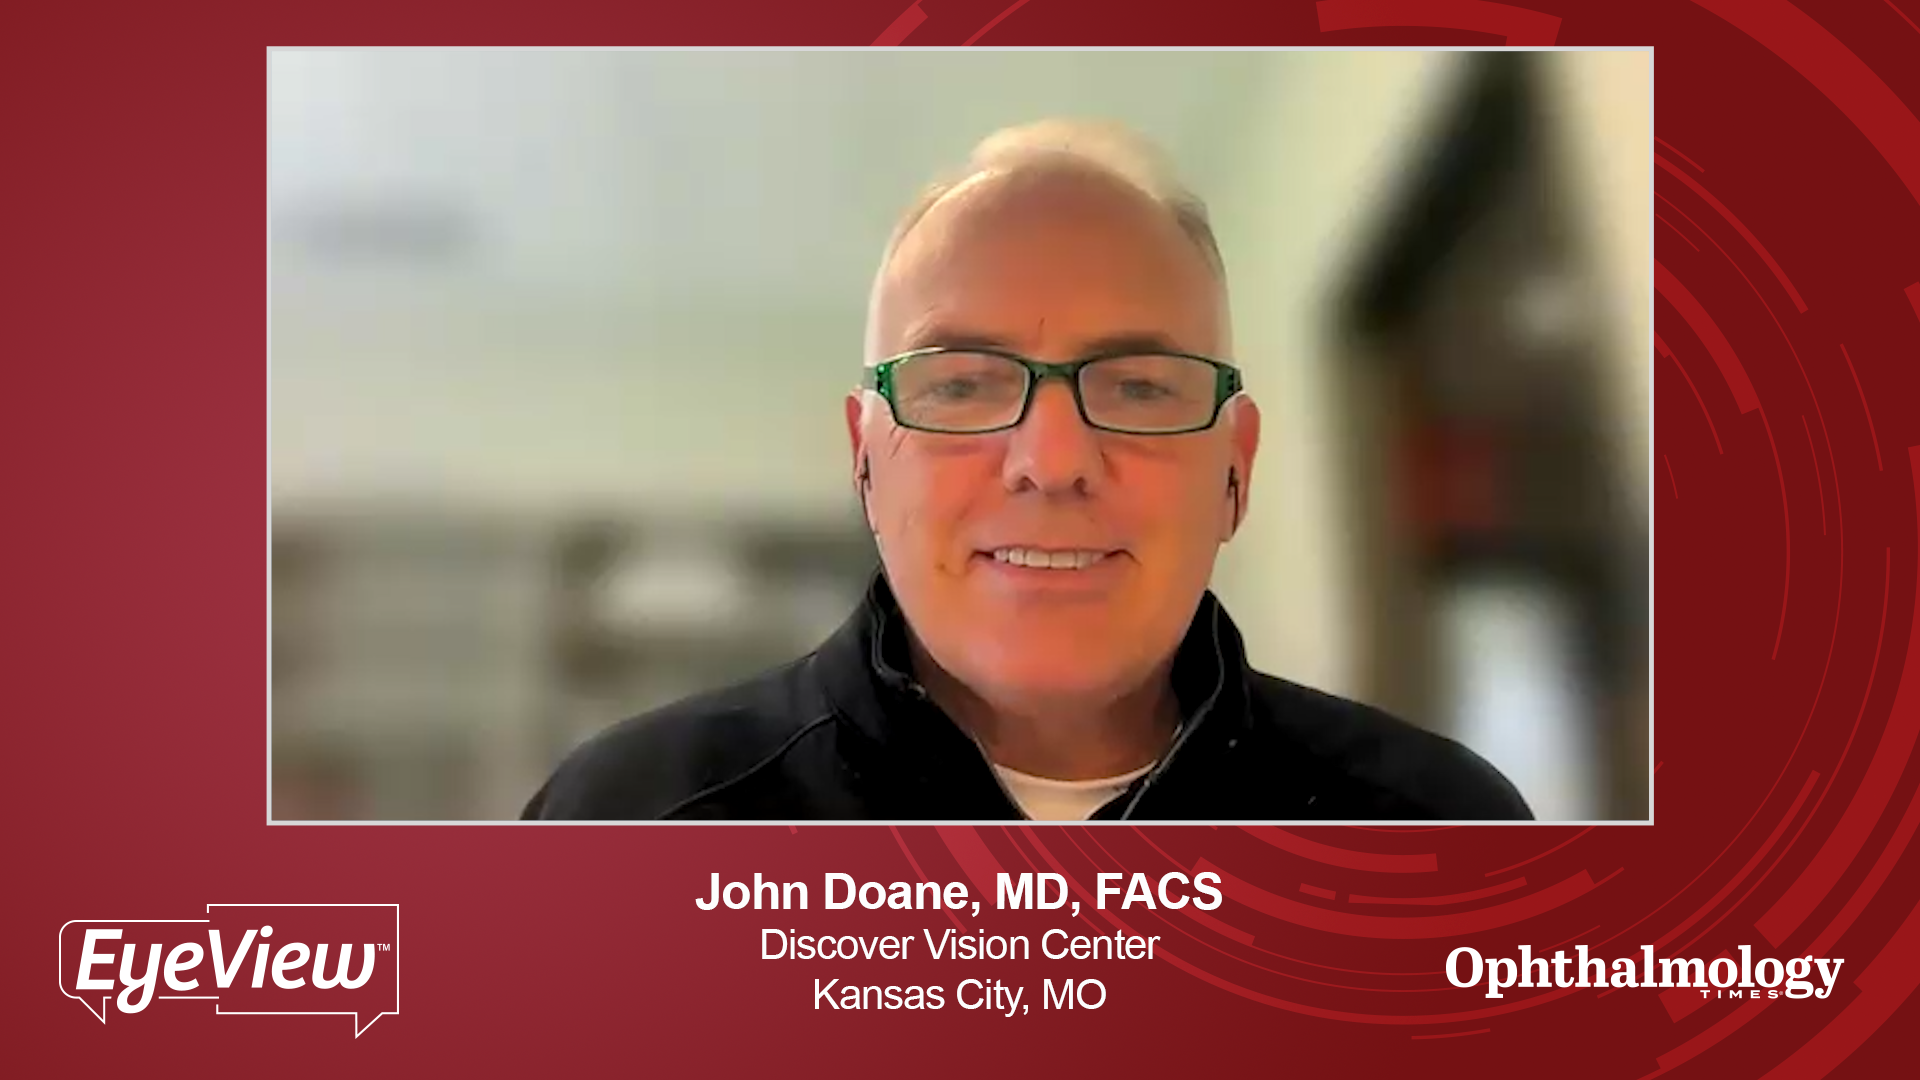 Video 1 - 1 KOL is featured in, "Overview of Small Incision Lenticule Extraction (SMILE)"